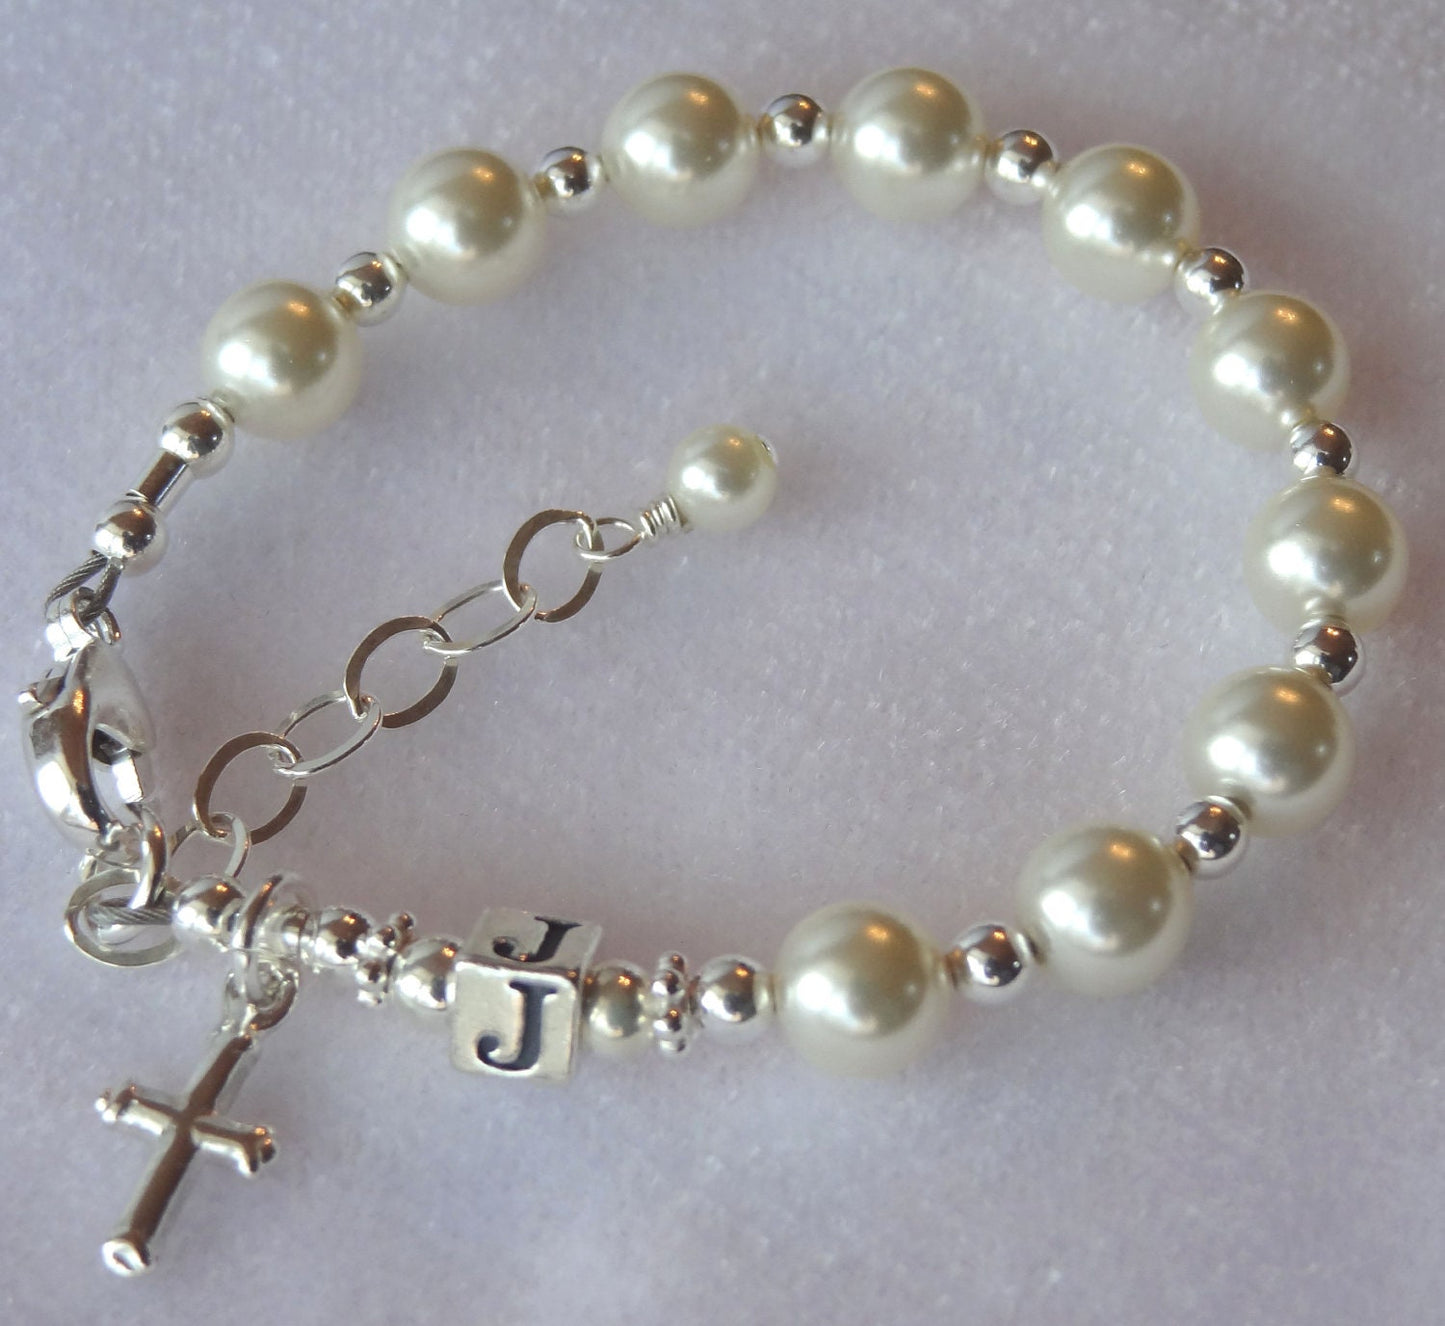 Personalized Silver Initial Rosary Bracelet,Initial Baby Bracelet,Confirmation Bracelet,First Communion Rosary Bracelet,Communion Girls Gift